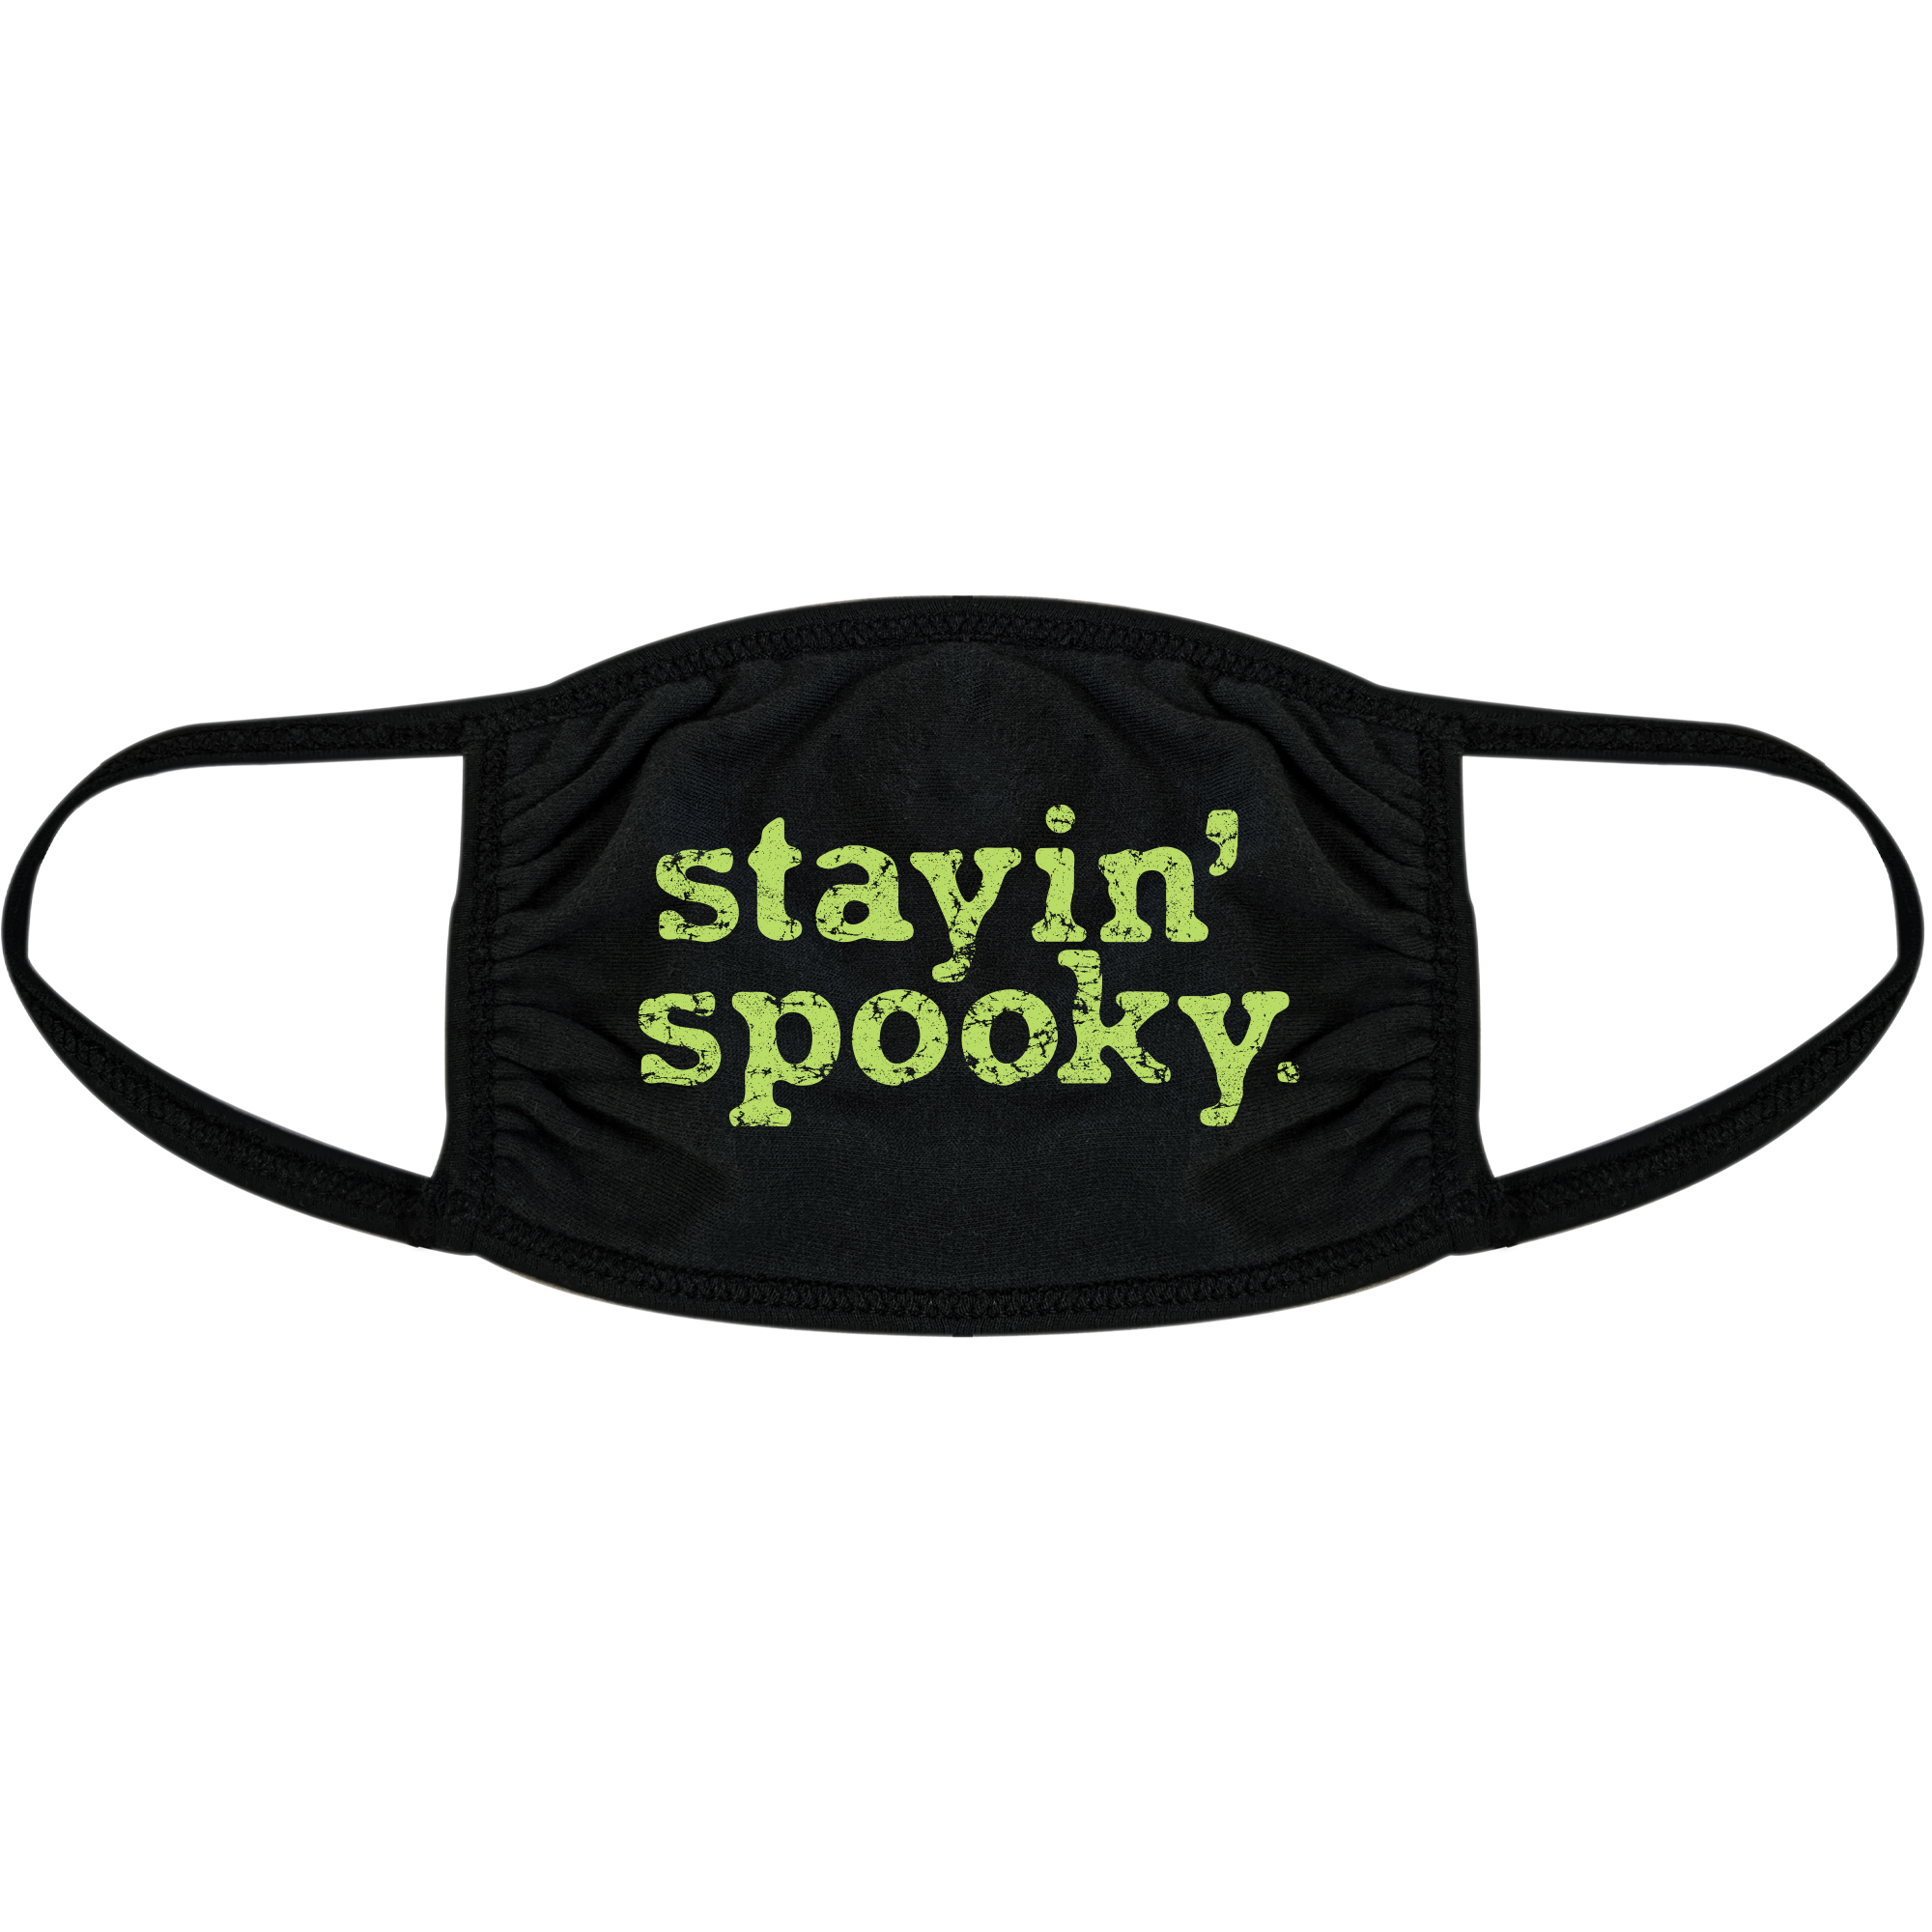 Stayin Spooky Face Mask Funny Halloween Costume Graphic Novelty Nose And Mouth Covering - image 1 of 6